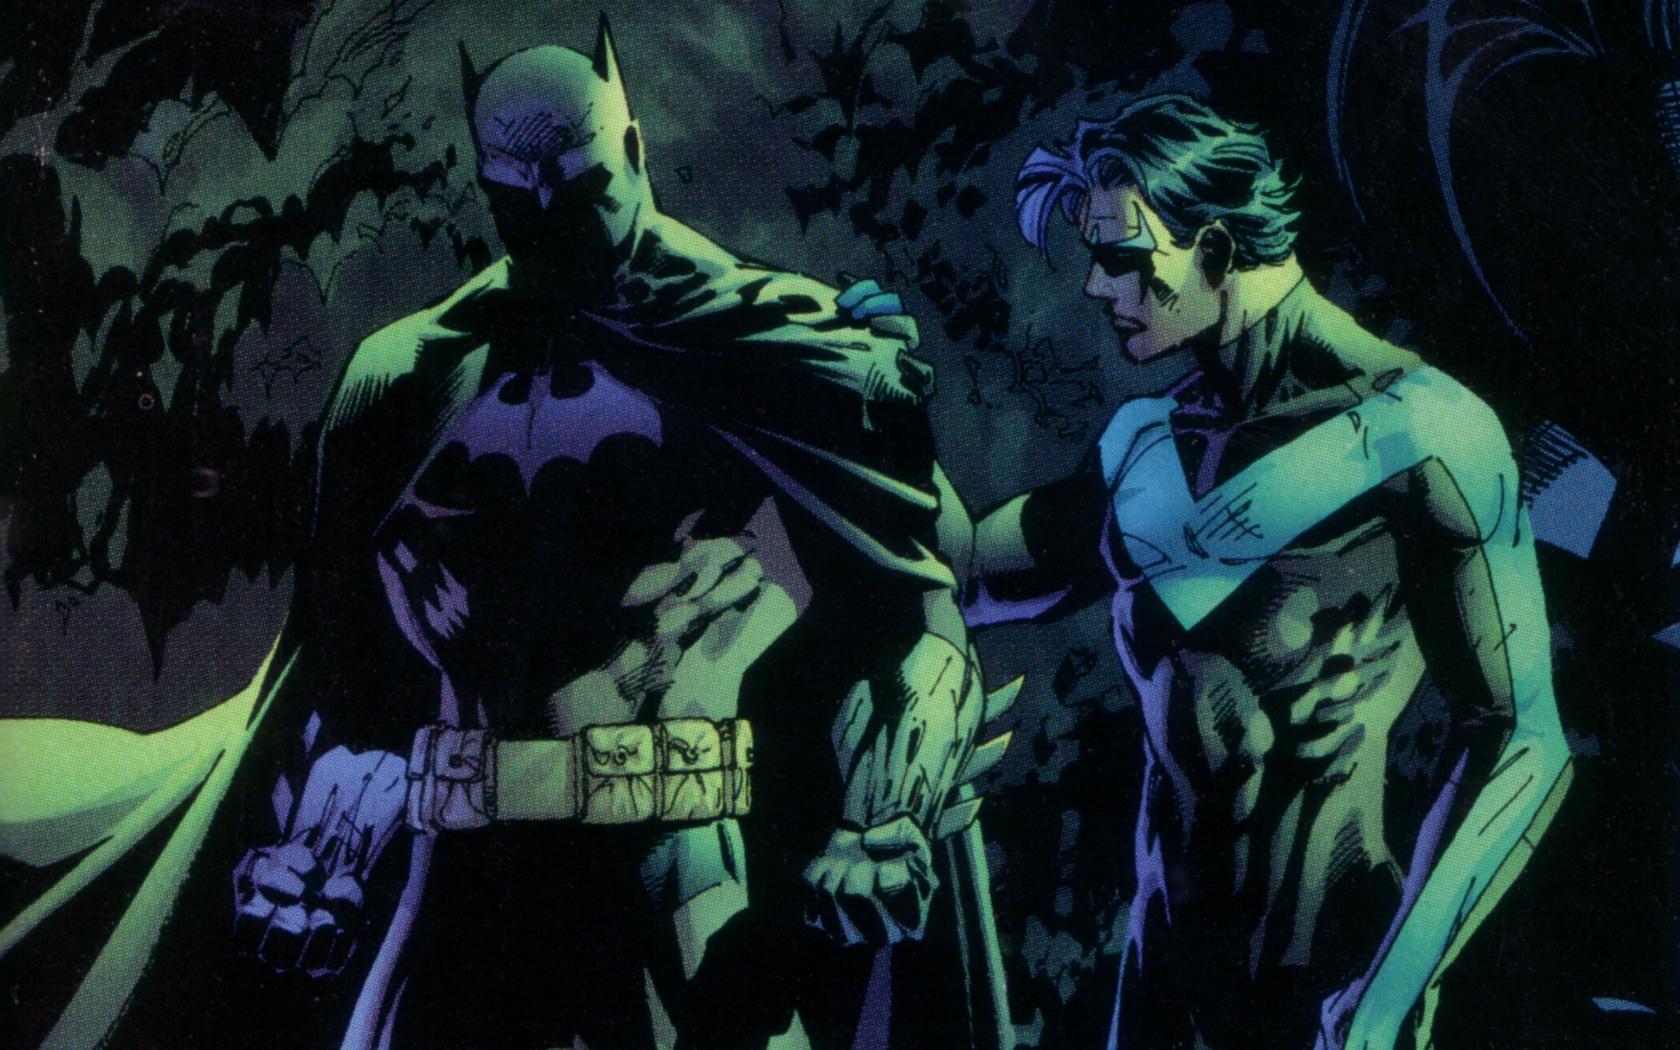 Nightwing and Batman, standing side by side in the night.